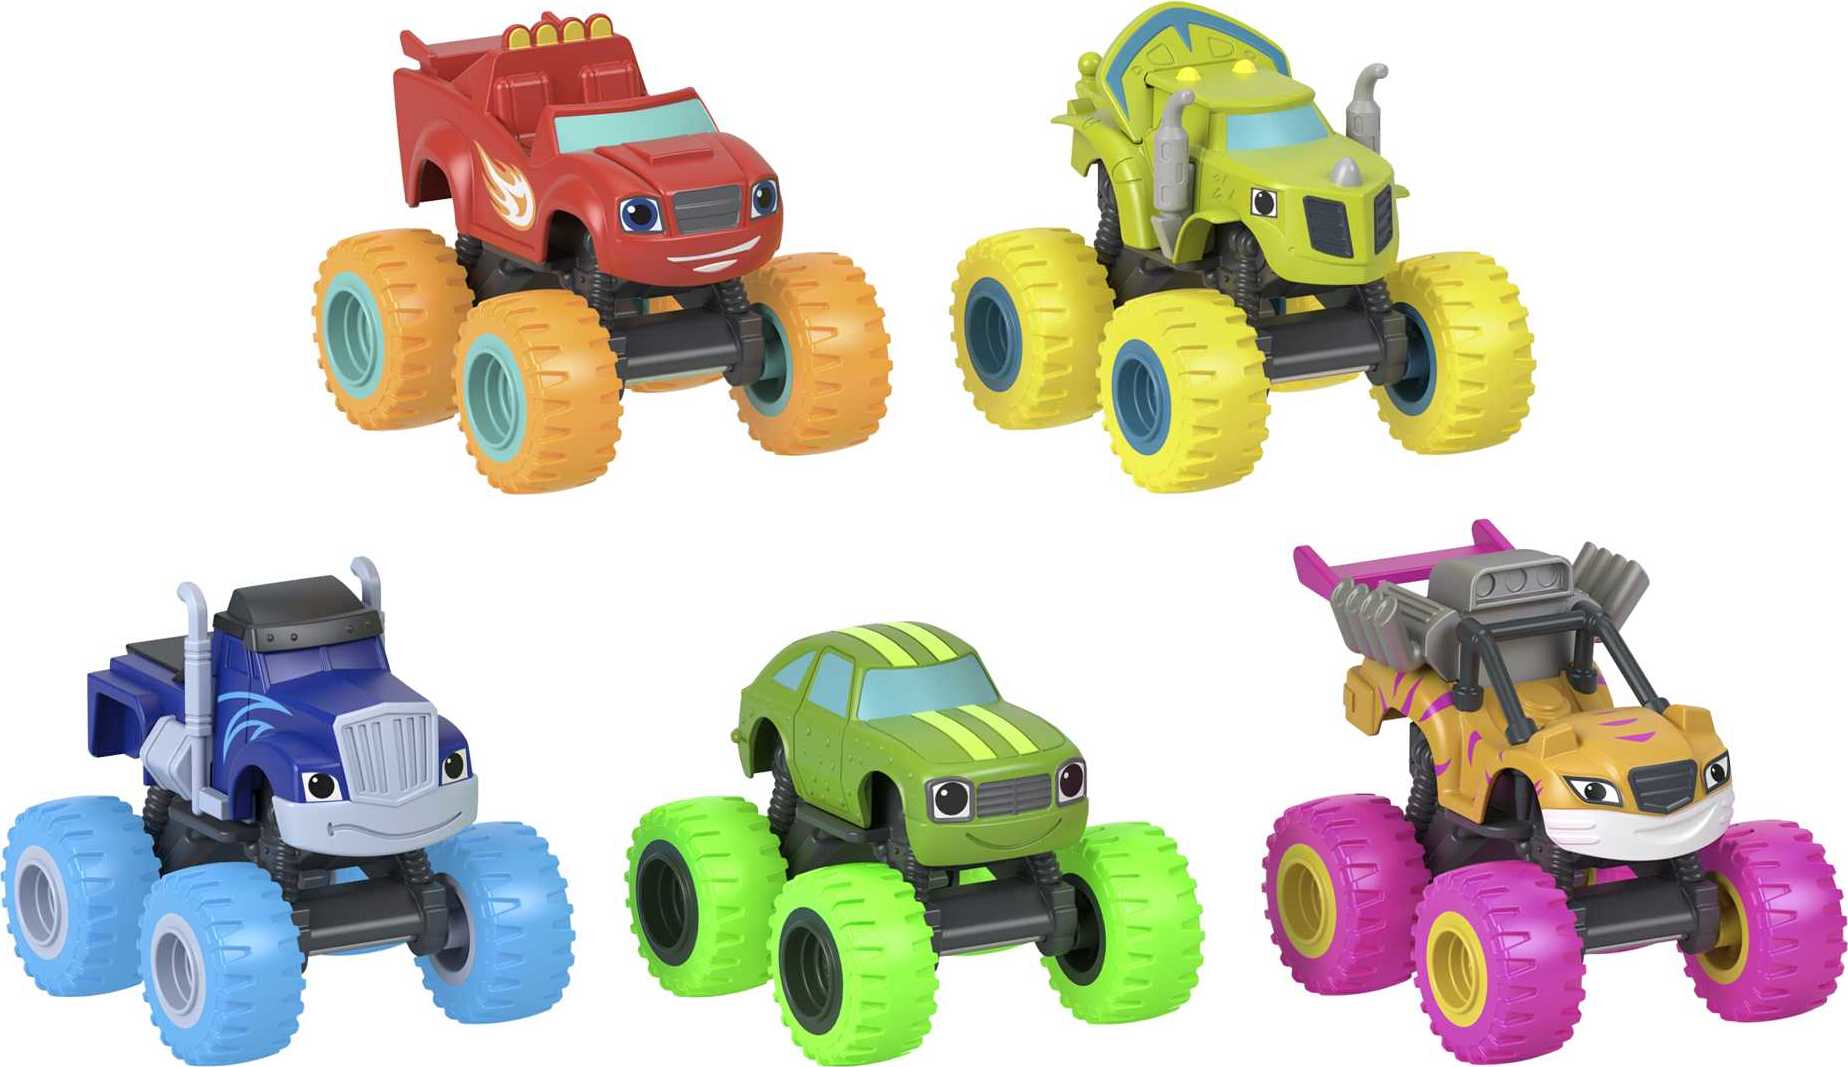 Fisher-Price Blaze and the Monster Machines Neon Wheels 5-Pack of Diecast Toy Trucks - image 1 of 6